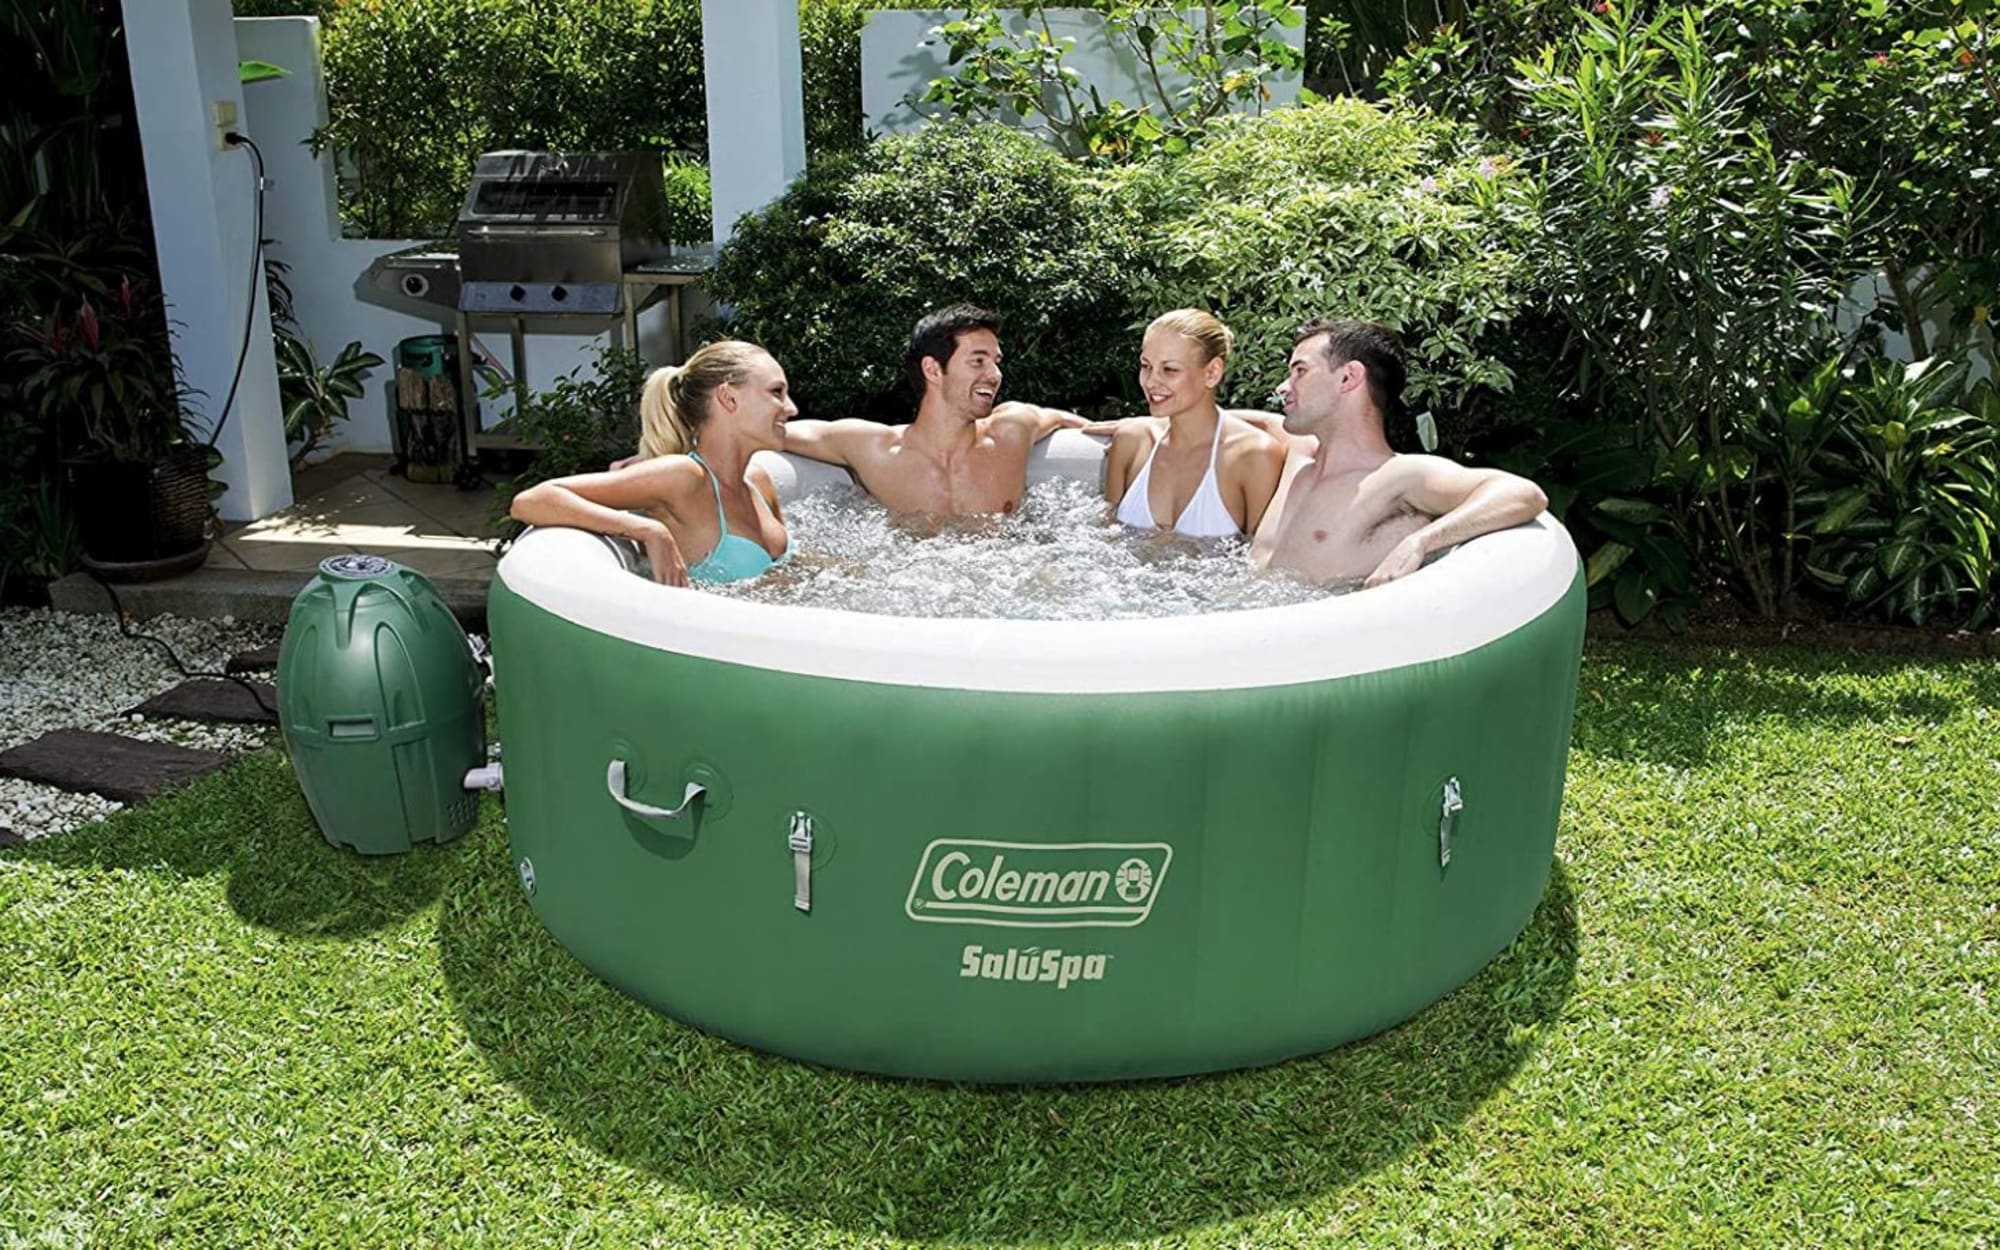 Plop This Coleman Inflatable Hot Tub On Your Lawn And Relax In Style